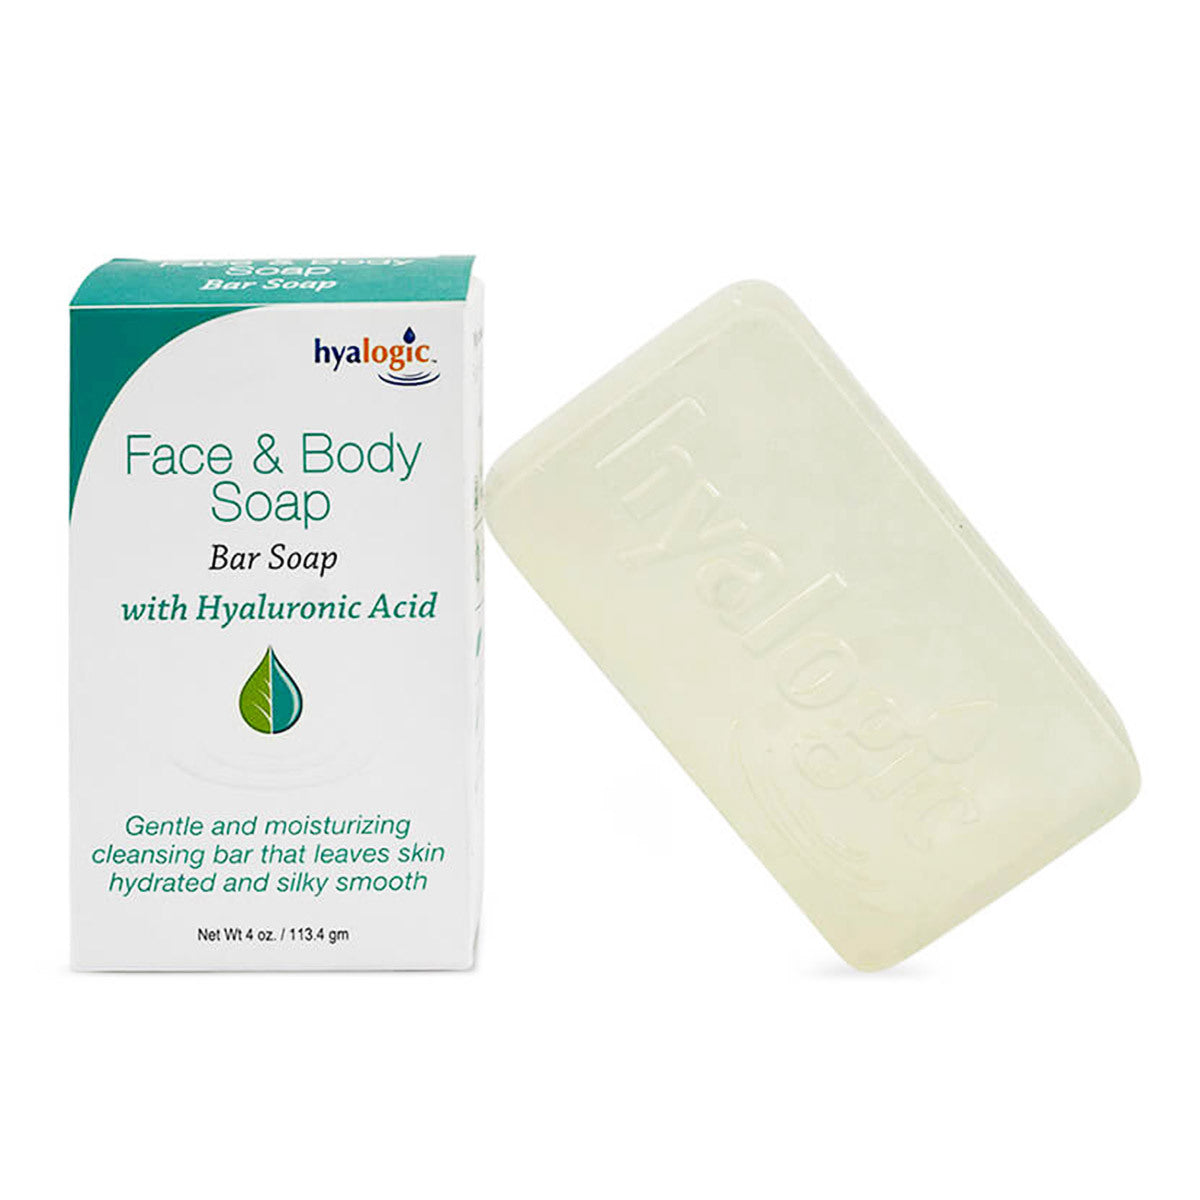 Primary image of Face + Body Bar Soap